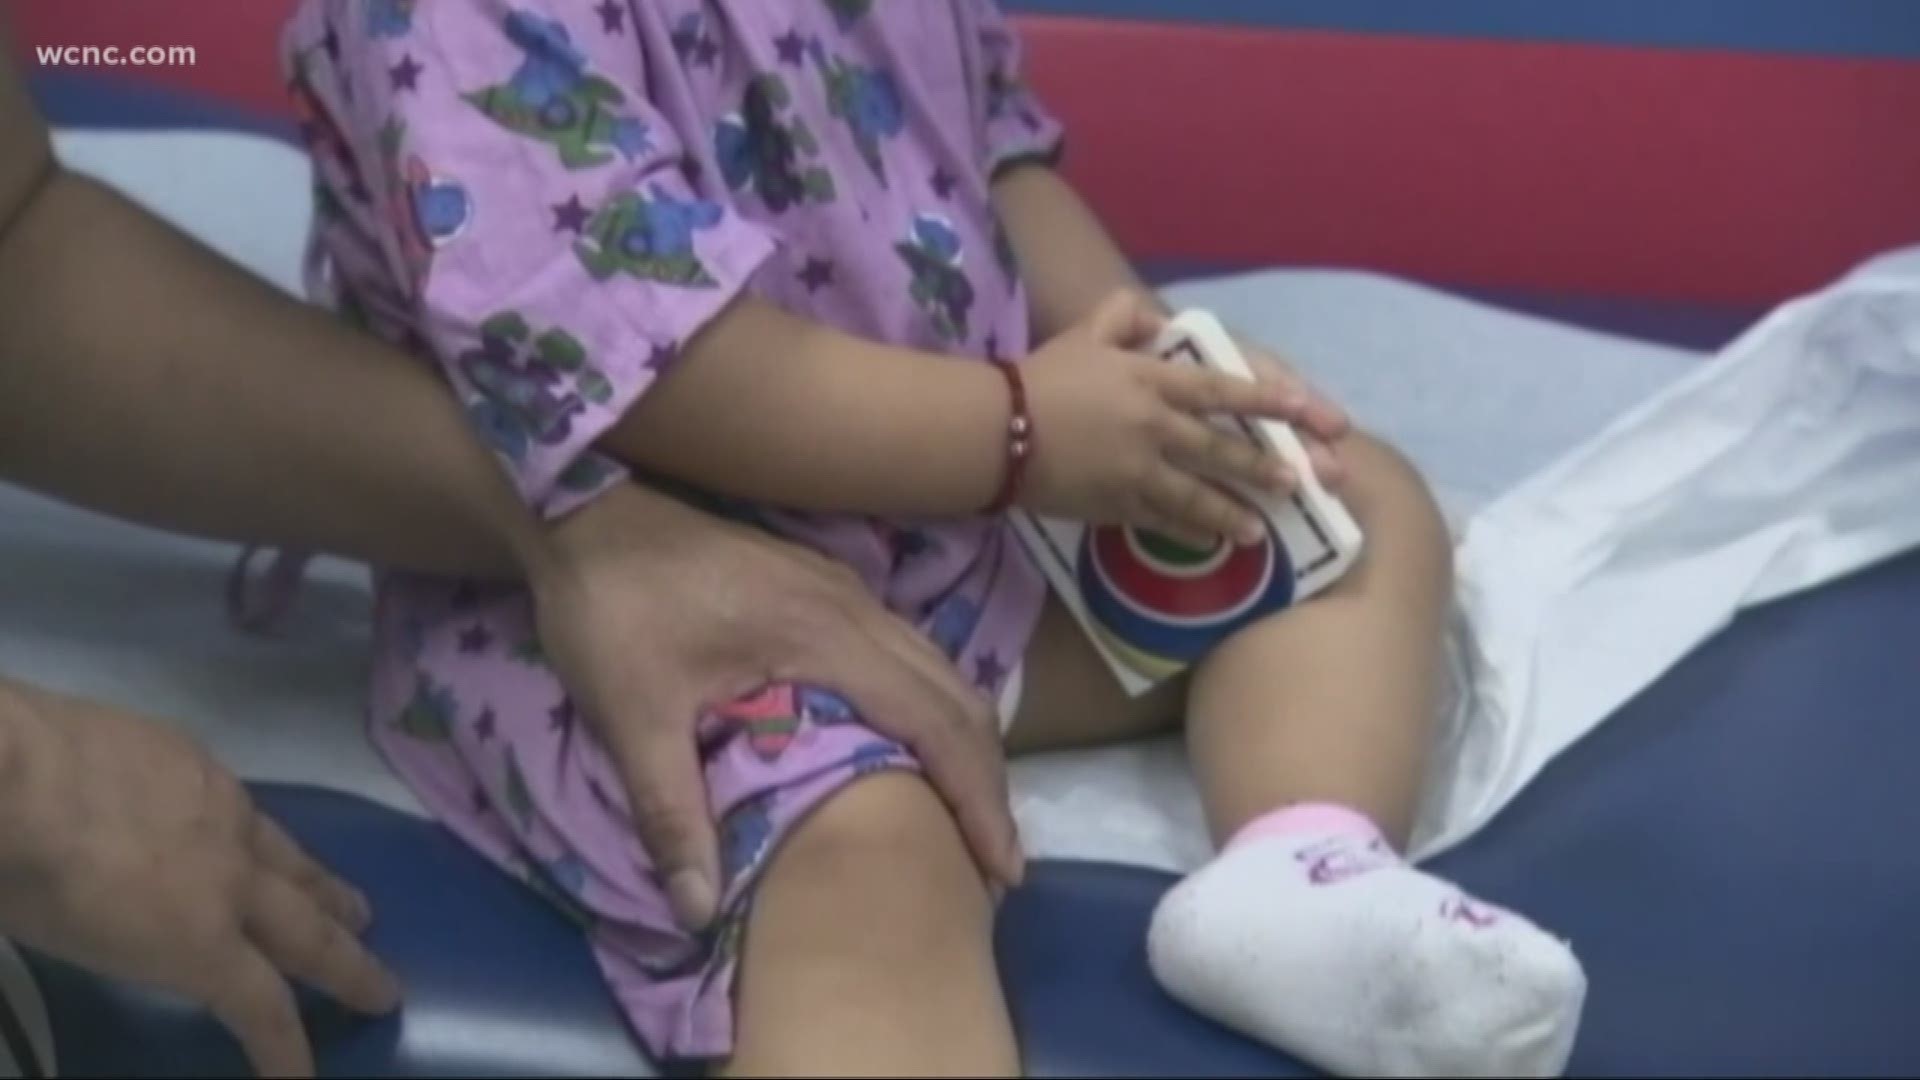 The CDC said there are now 90 confirmed cases of Aacute Flaccid Myelitis in 27 states.